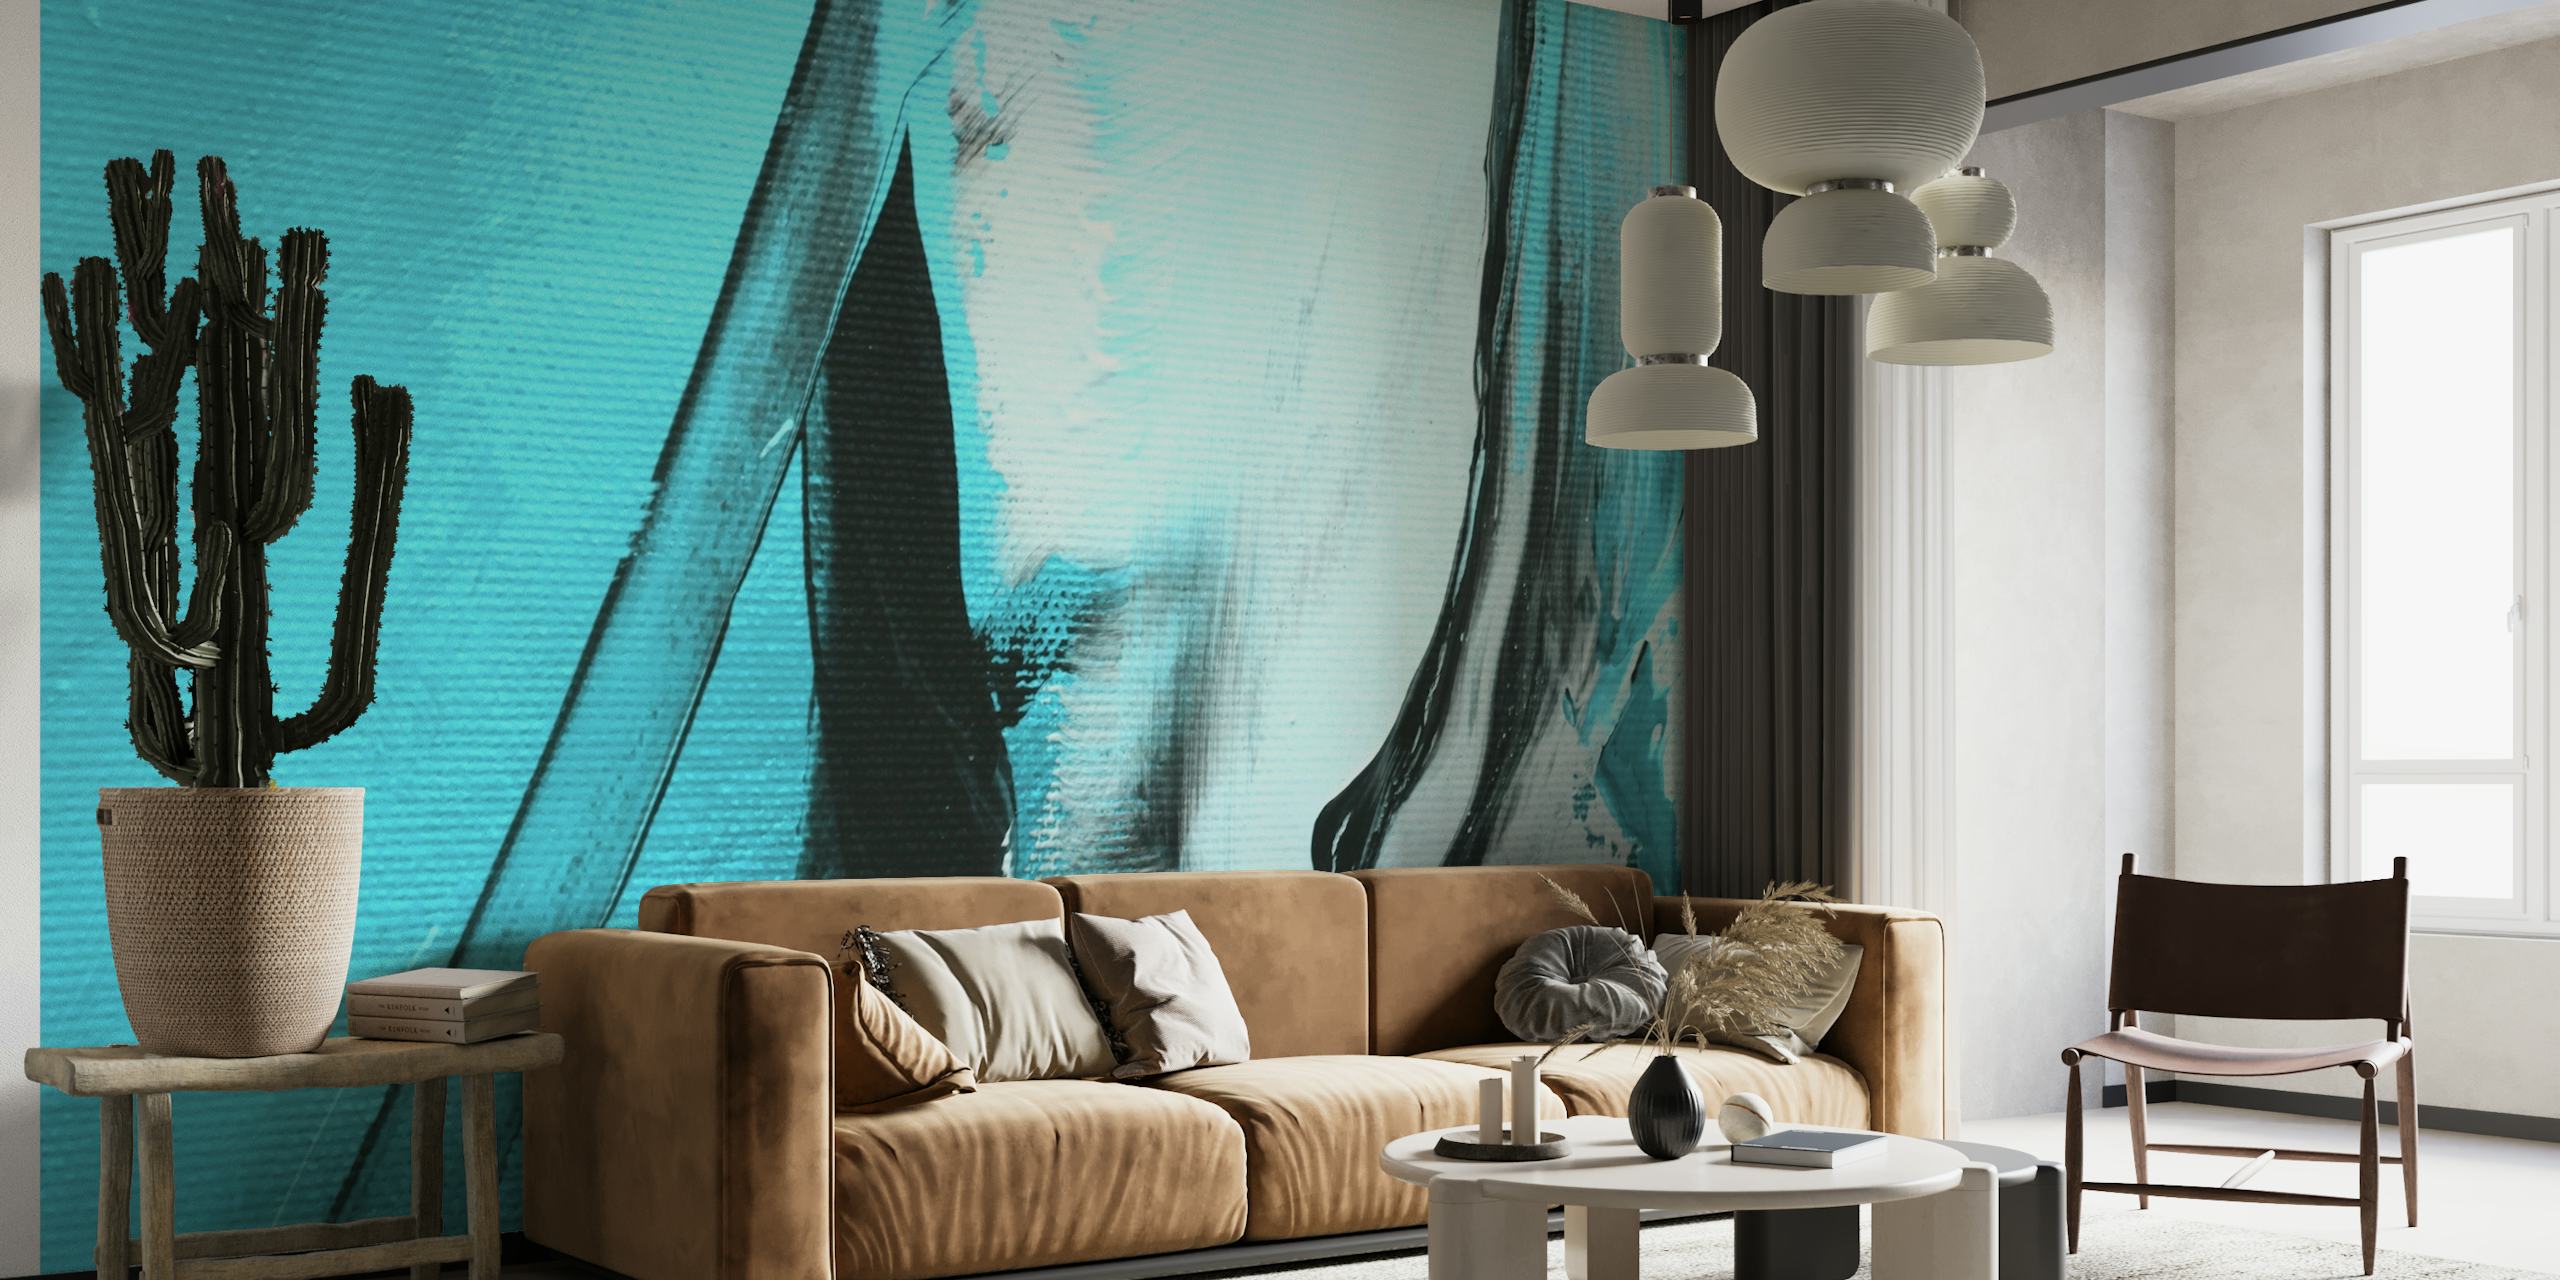 Turquoise Meets Black Abstract Art papel pintado